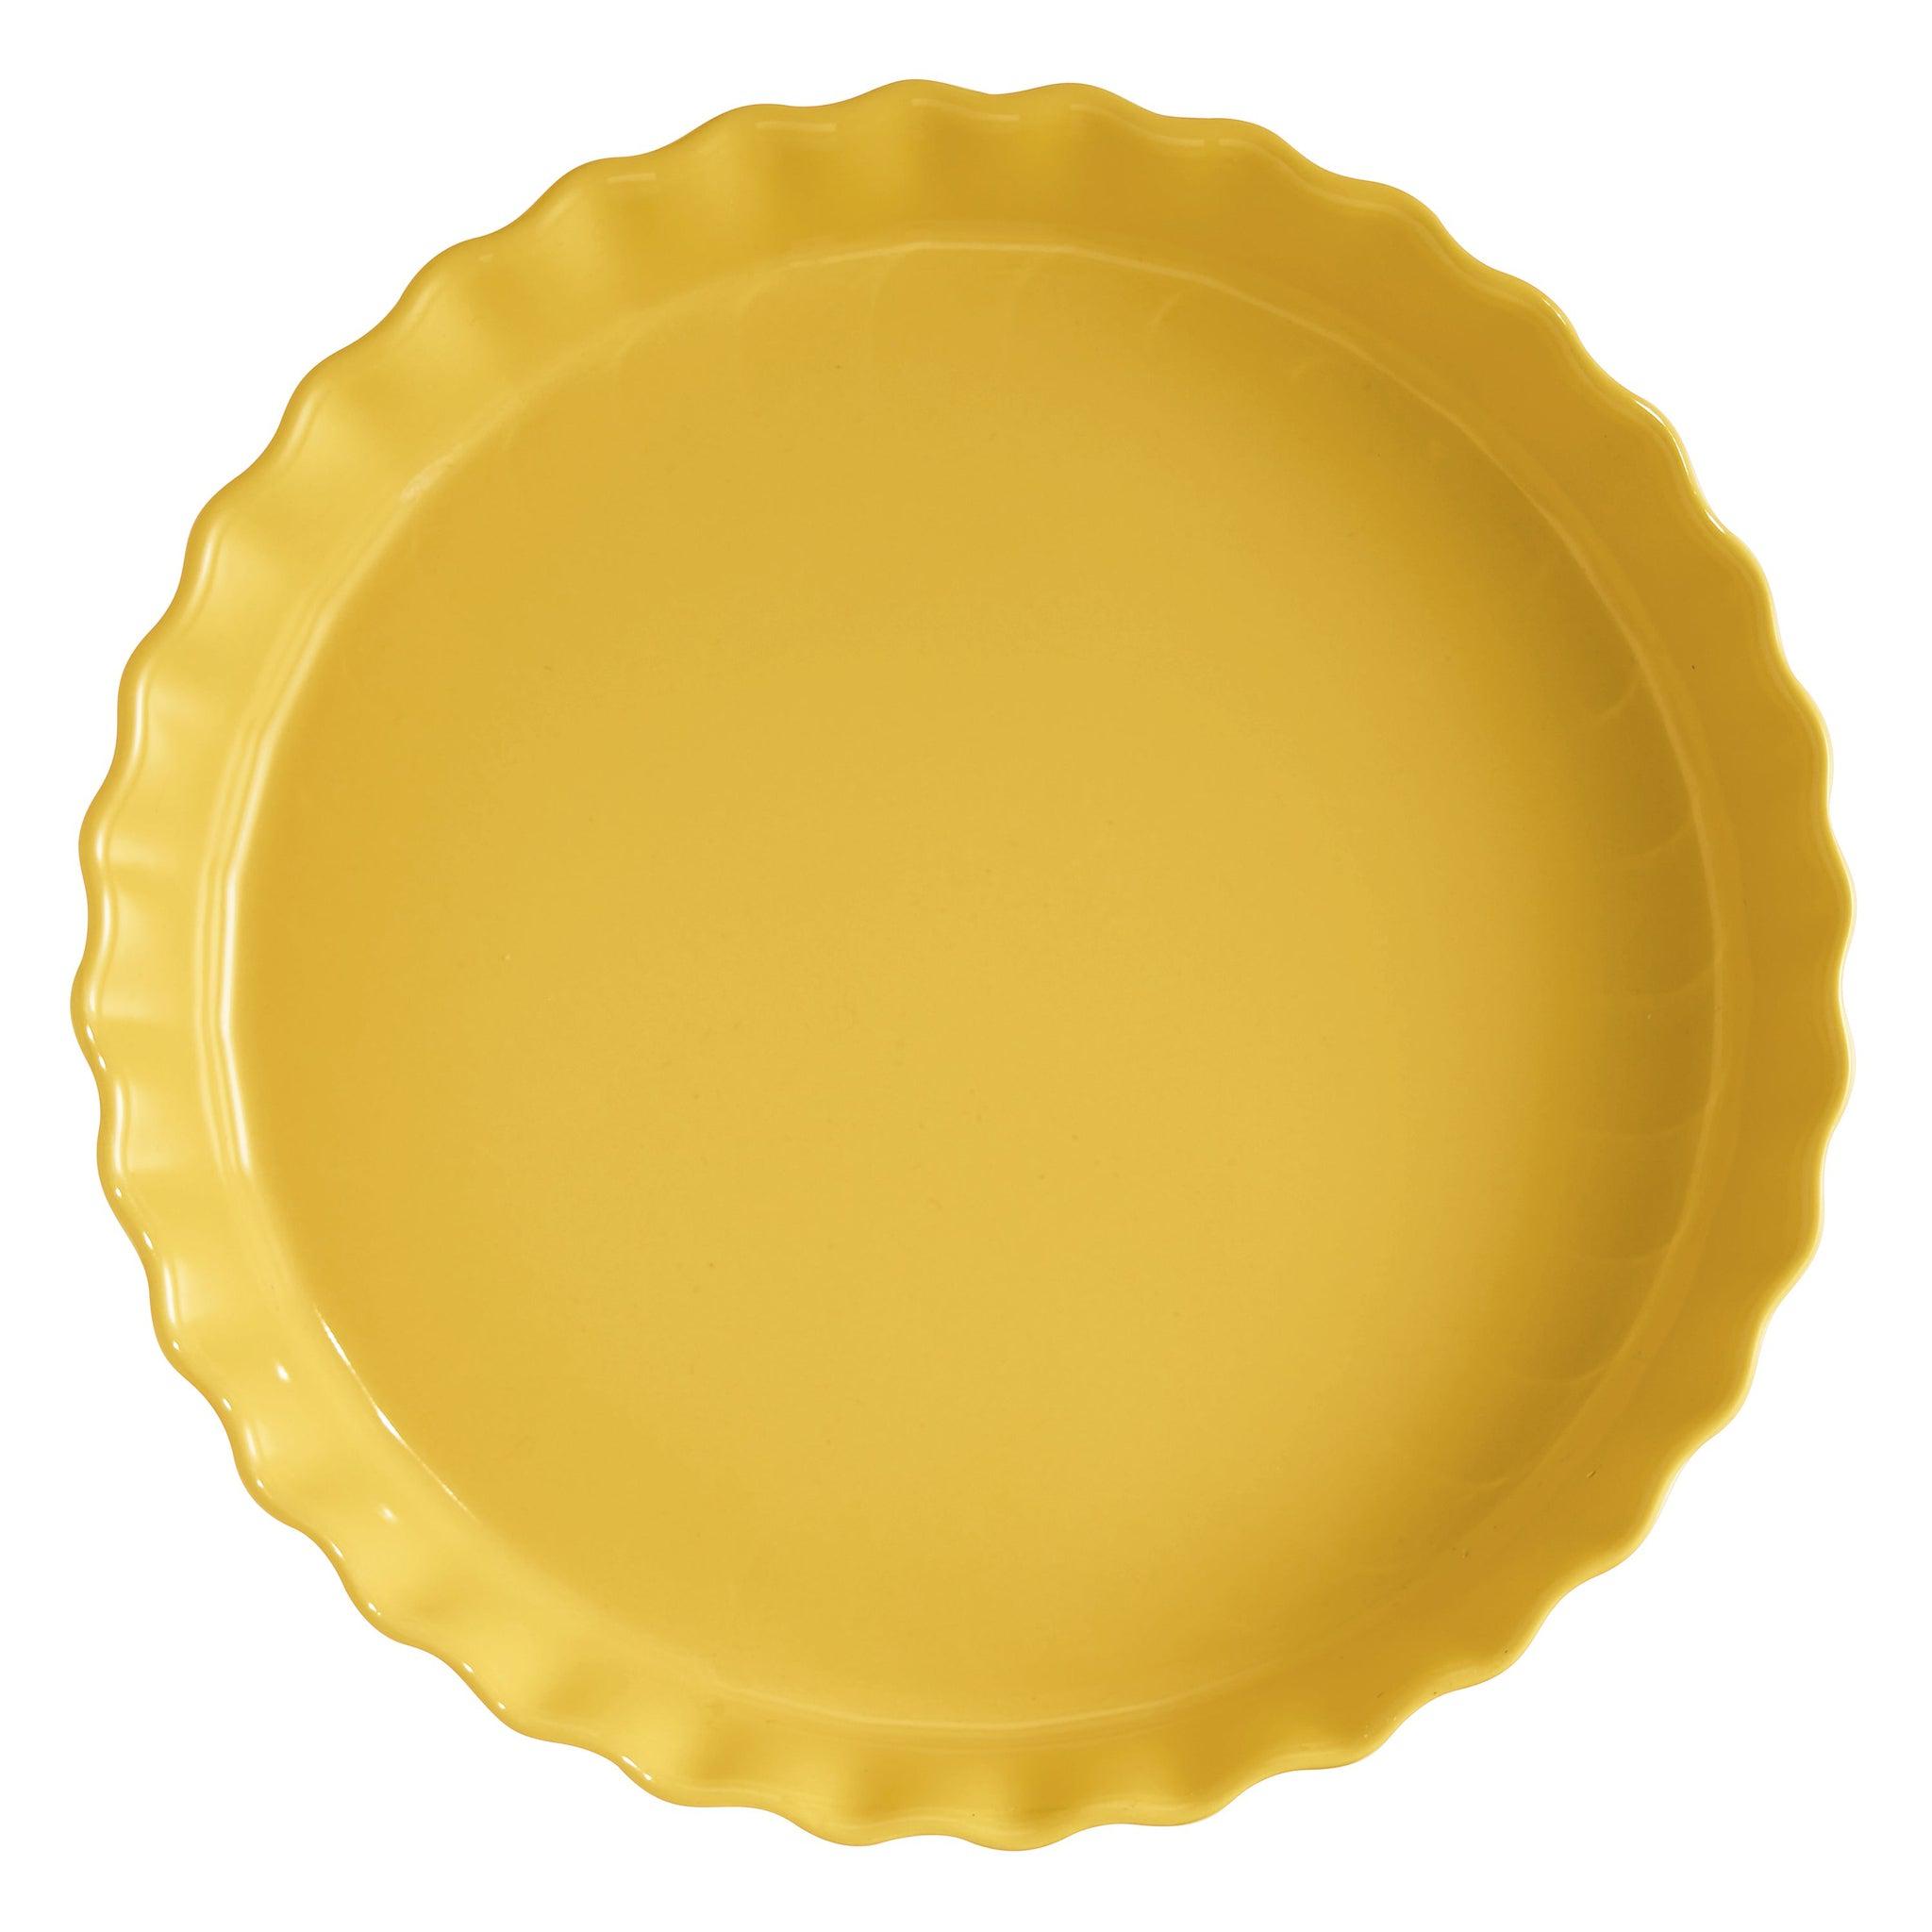 Emile Henry Deep Flan Dish In Provence Yellow 32cm